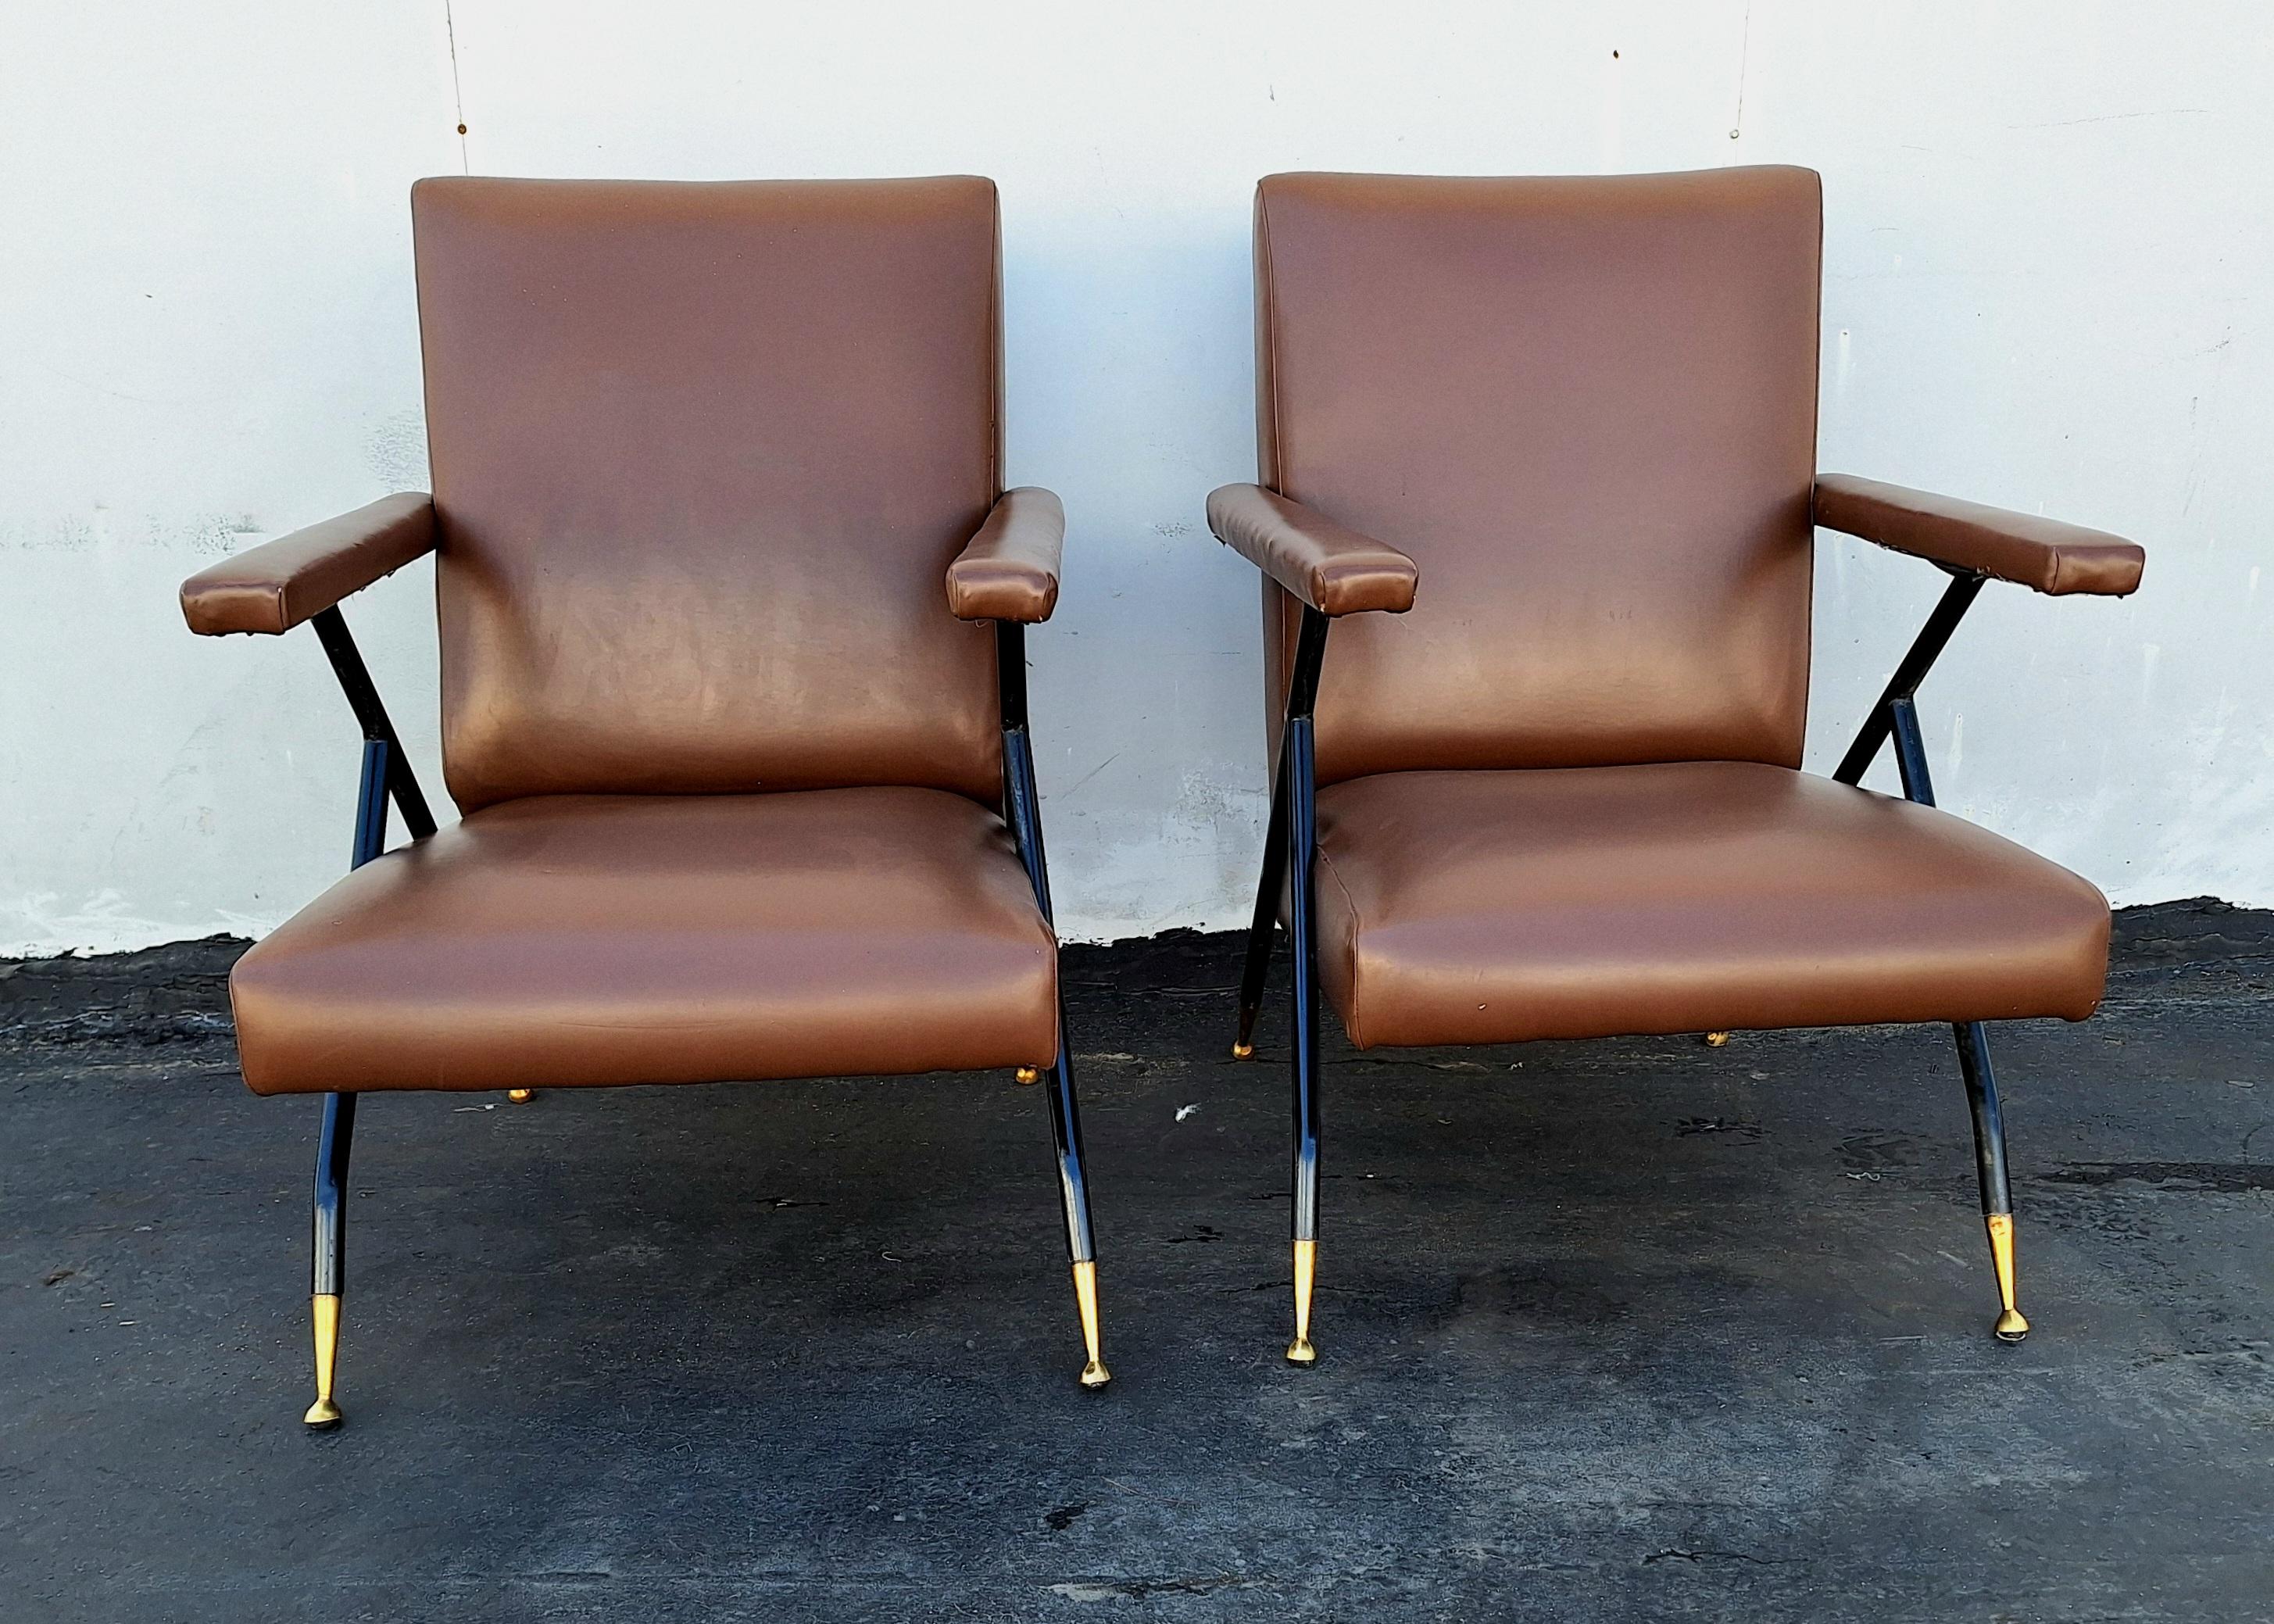 Italian mid century chairs ,metal frame  brass boots legs  vinyl upholstery in original condition .Chairs are comfortable and typical  mid century Italian design .  